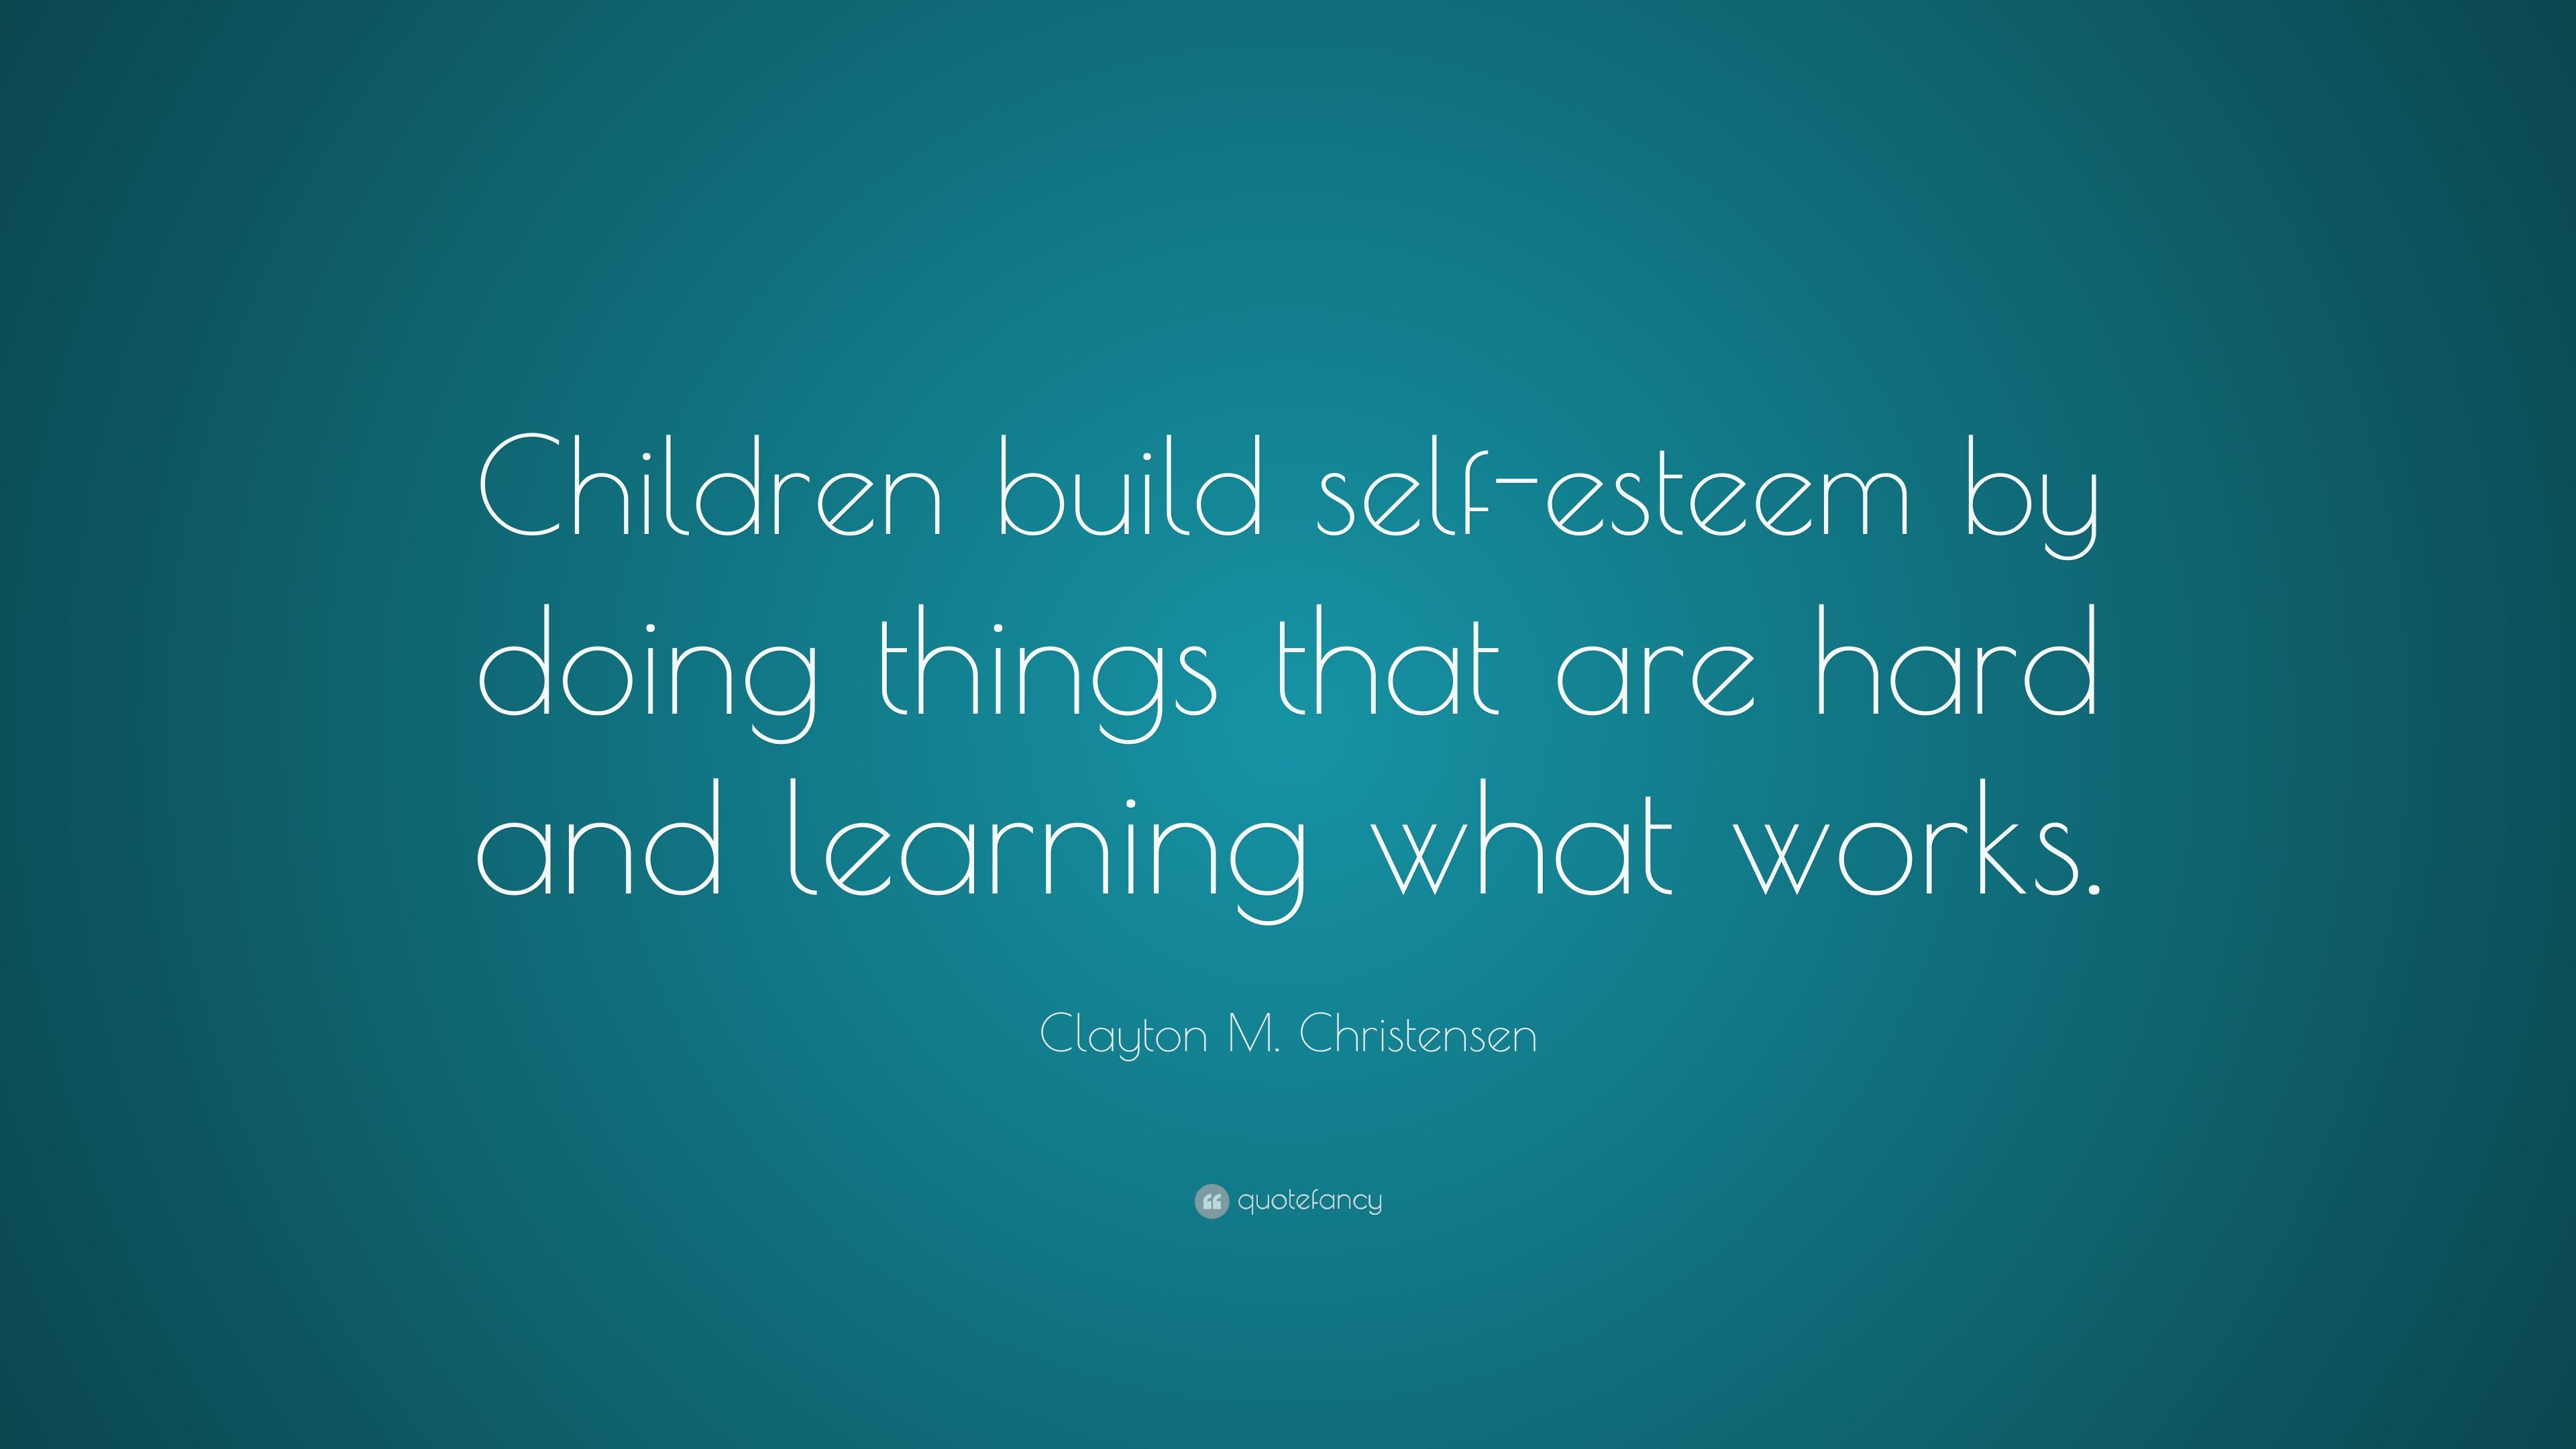 Clayton M. Christensen Quote: “Children Build Self Esteem By Doing Things That Are Hard And Learning What Works.” (7 Wallpaper)